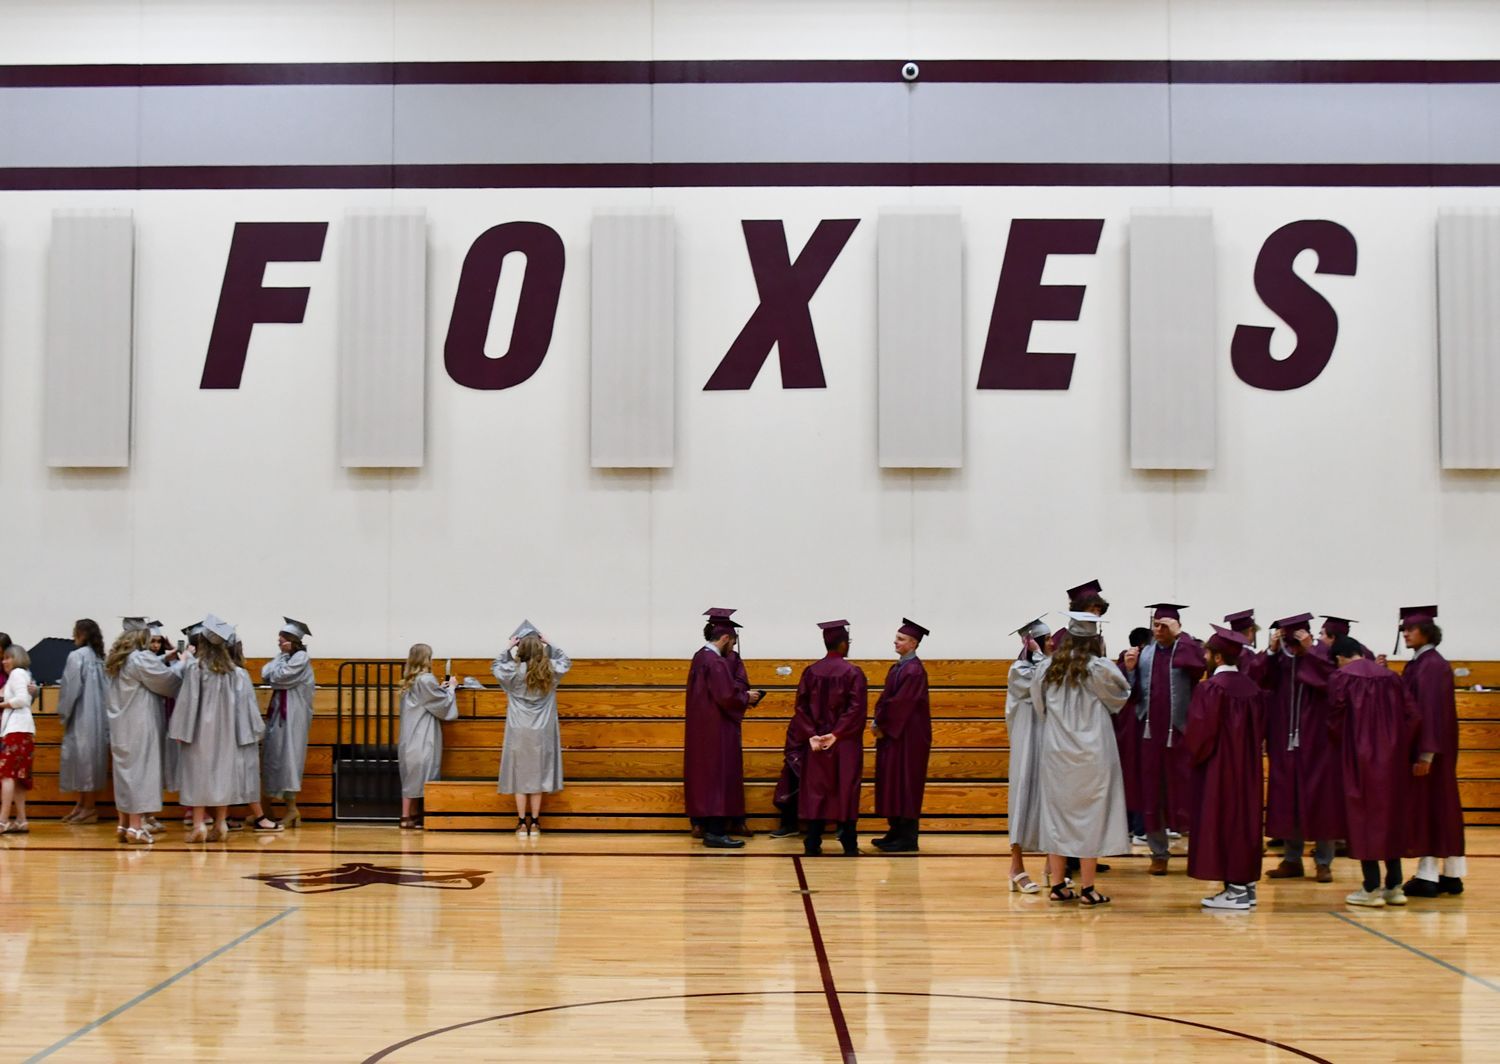 Pre-graduation in the small gym. Guys and girls in cap and gown with the word FOXES on the wall behind them